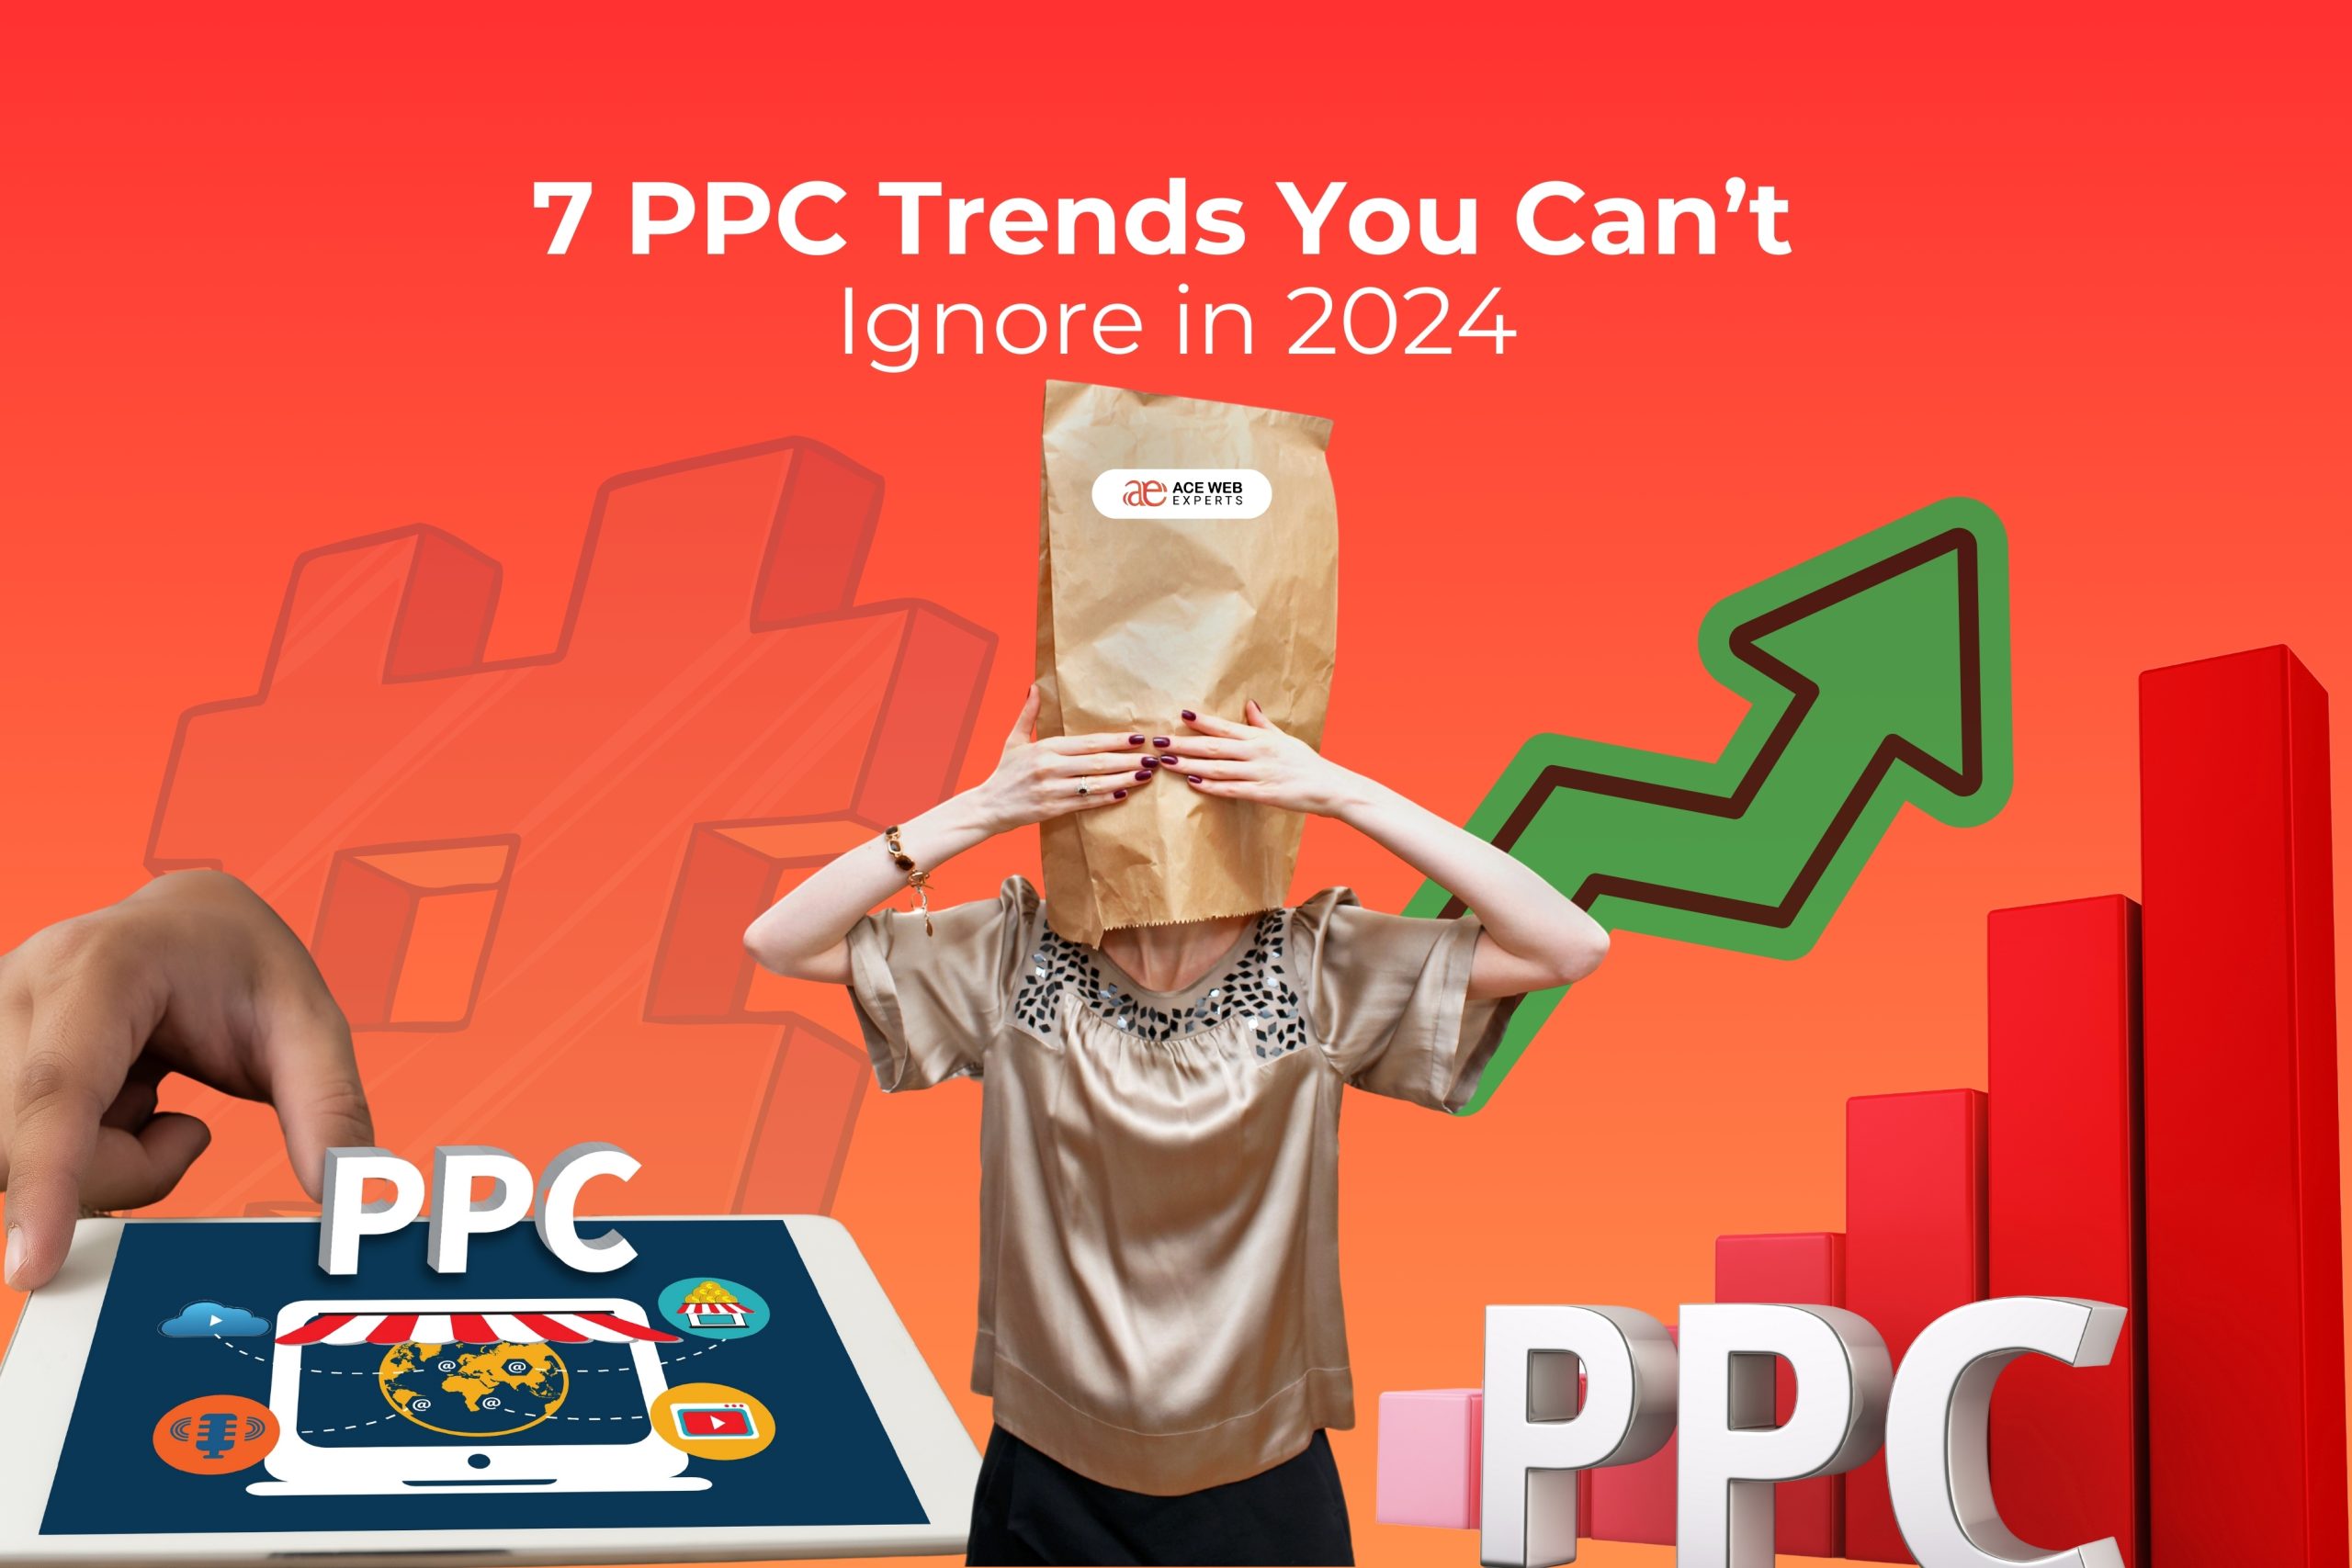 7 PPC Trends You Can’t Ignore in 2024